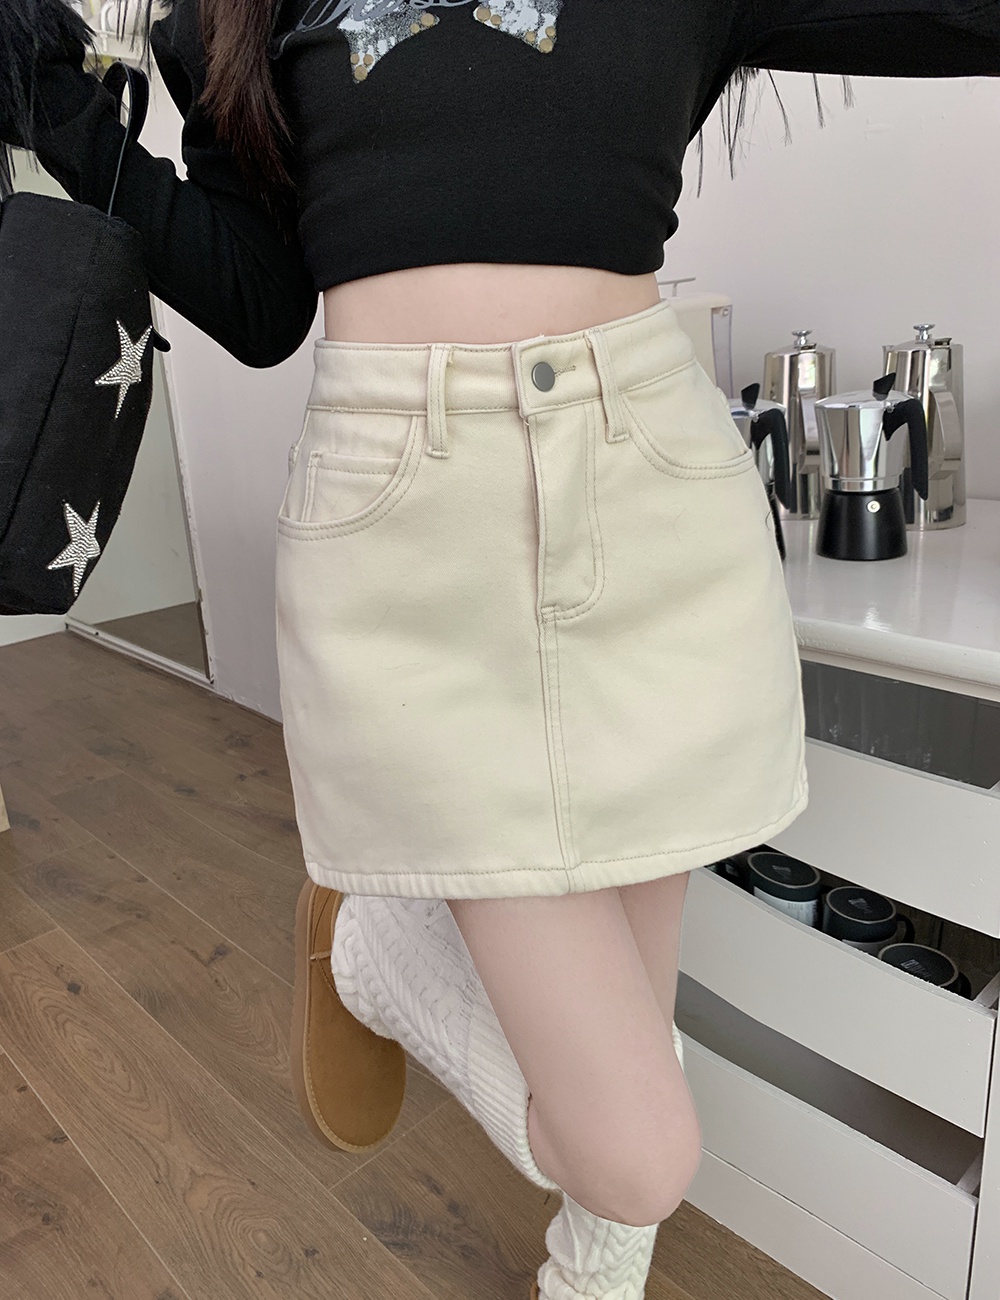 A-line retro short skirt anti emptied thermal pants for women